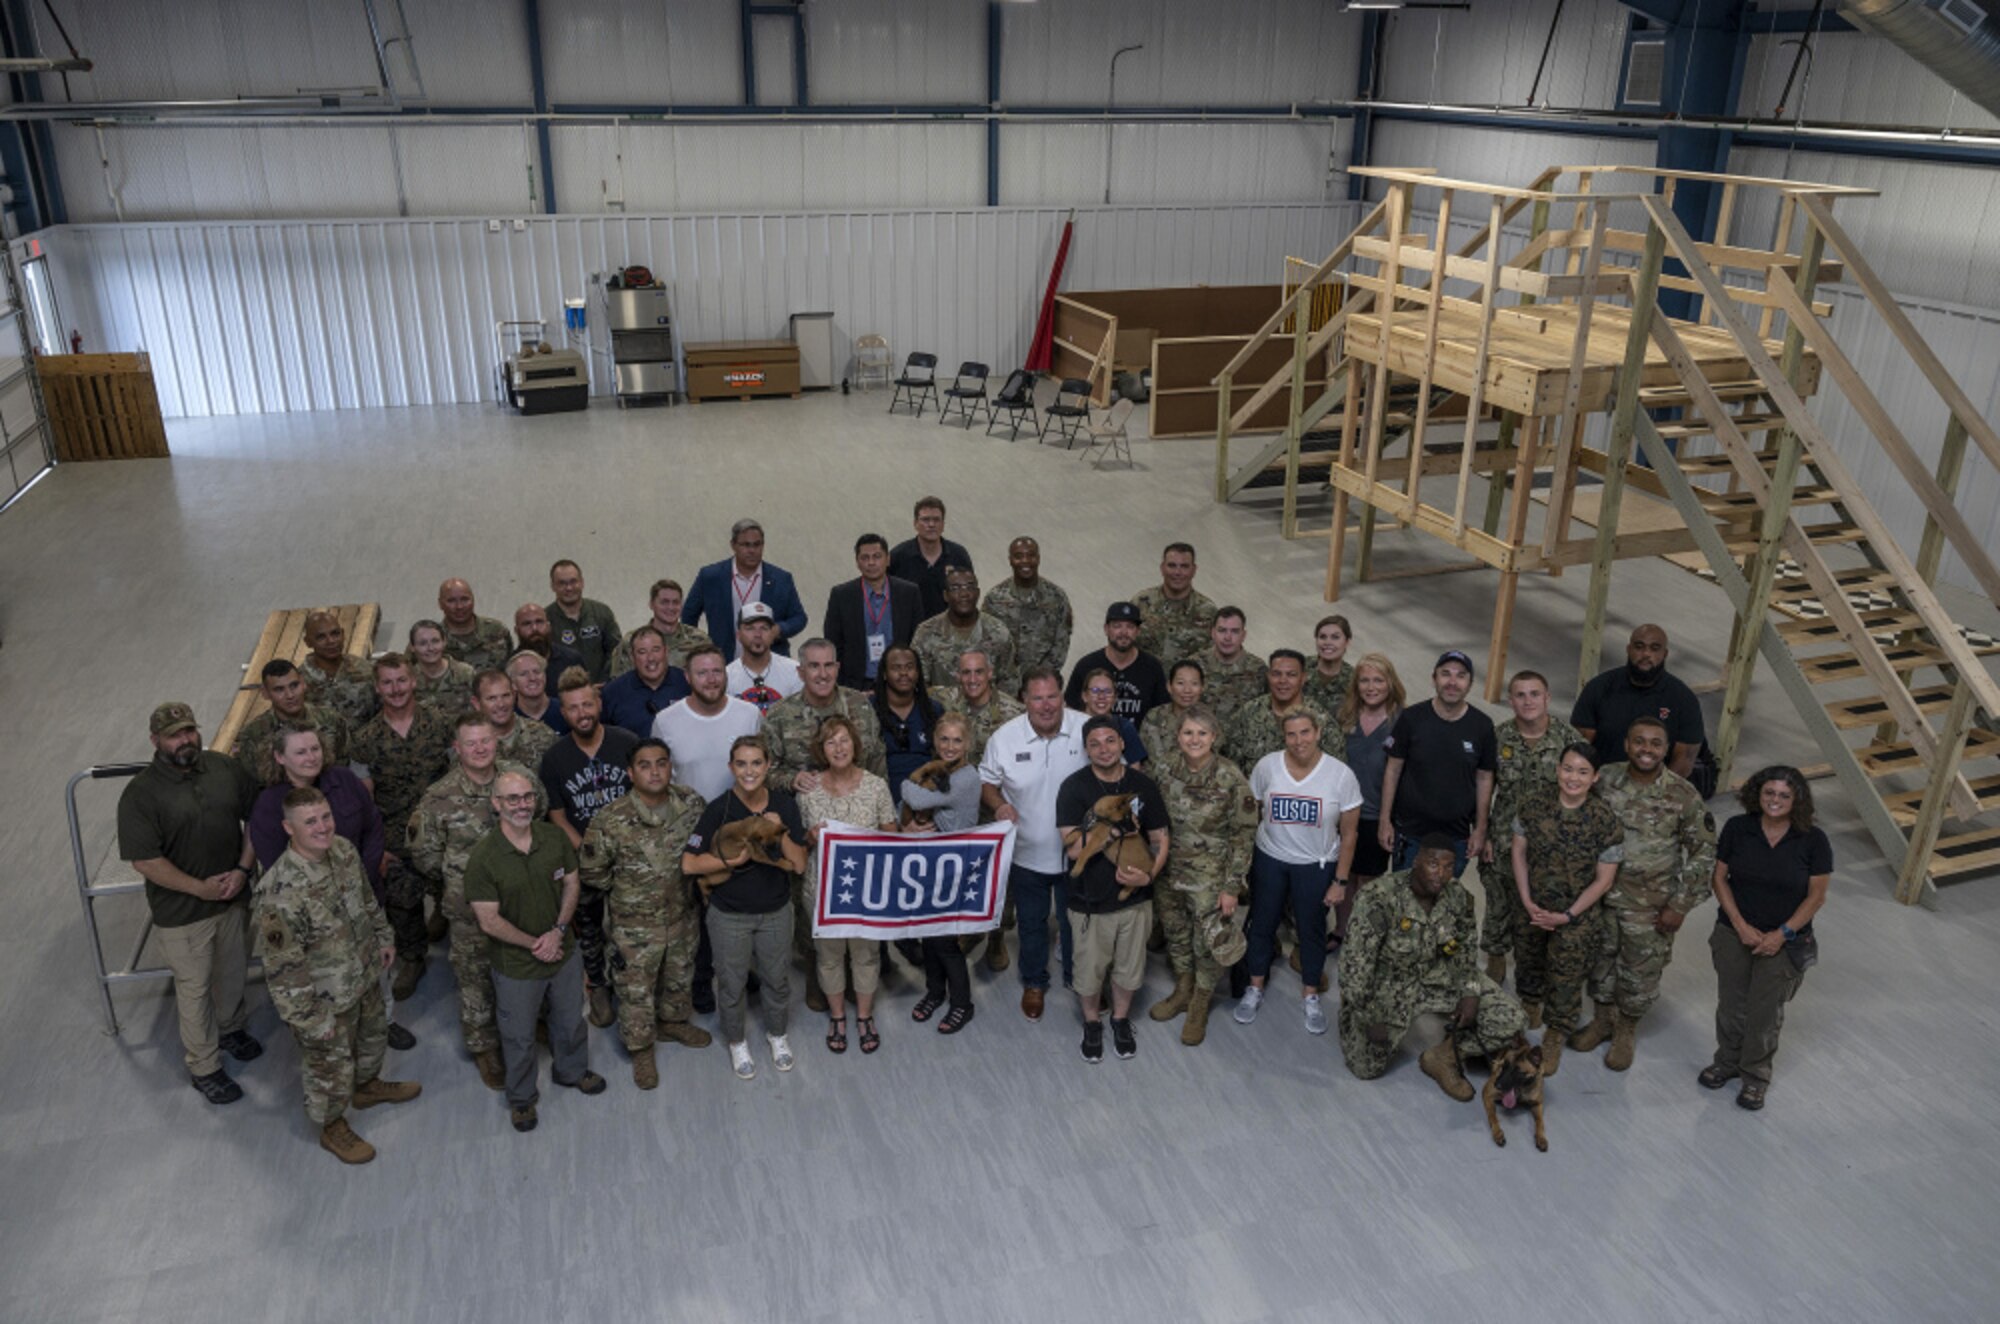 A group photo of military and civilian members during the USO Tour at Joint Base San Antonio.